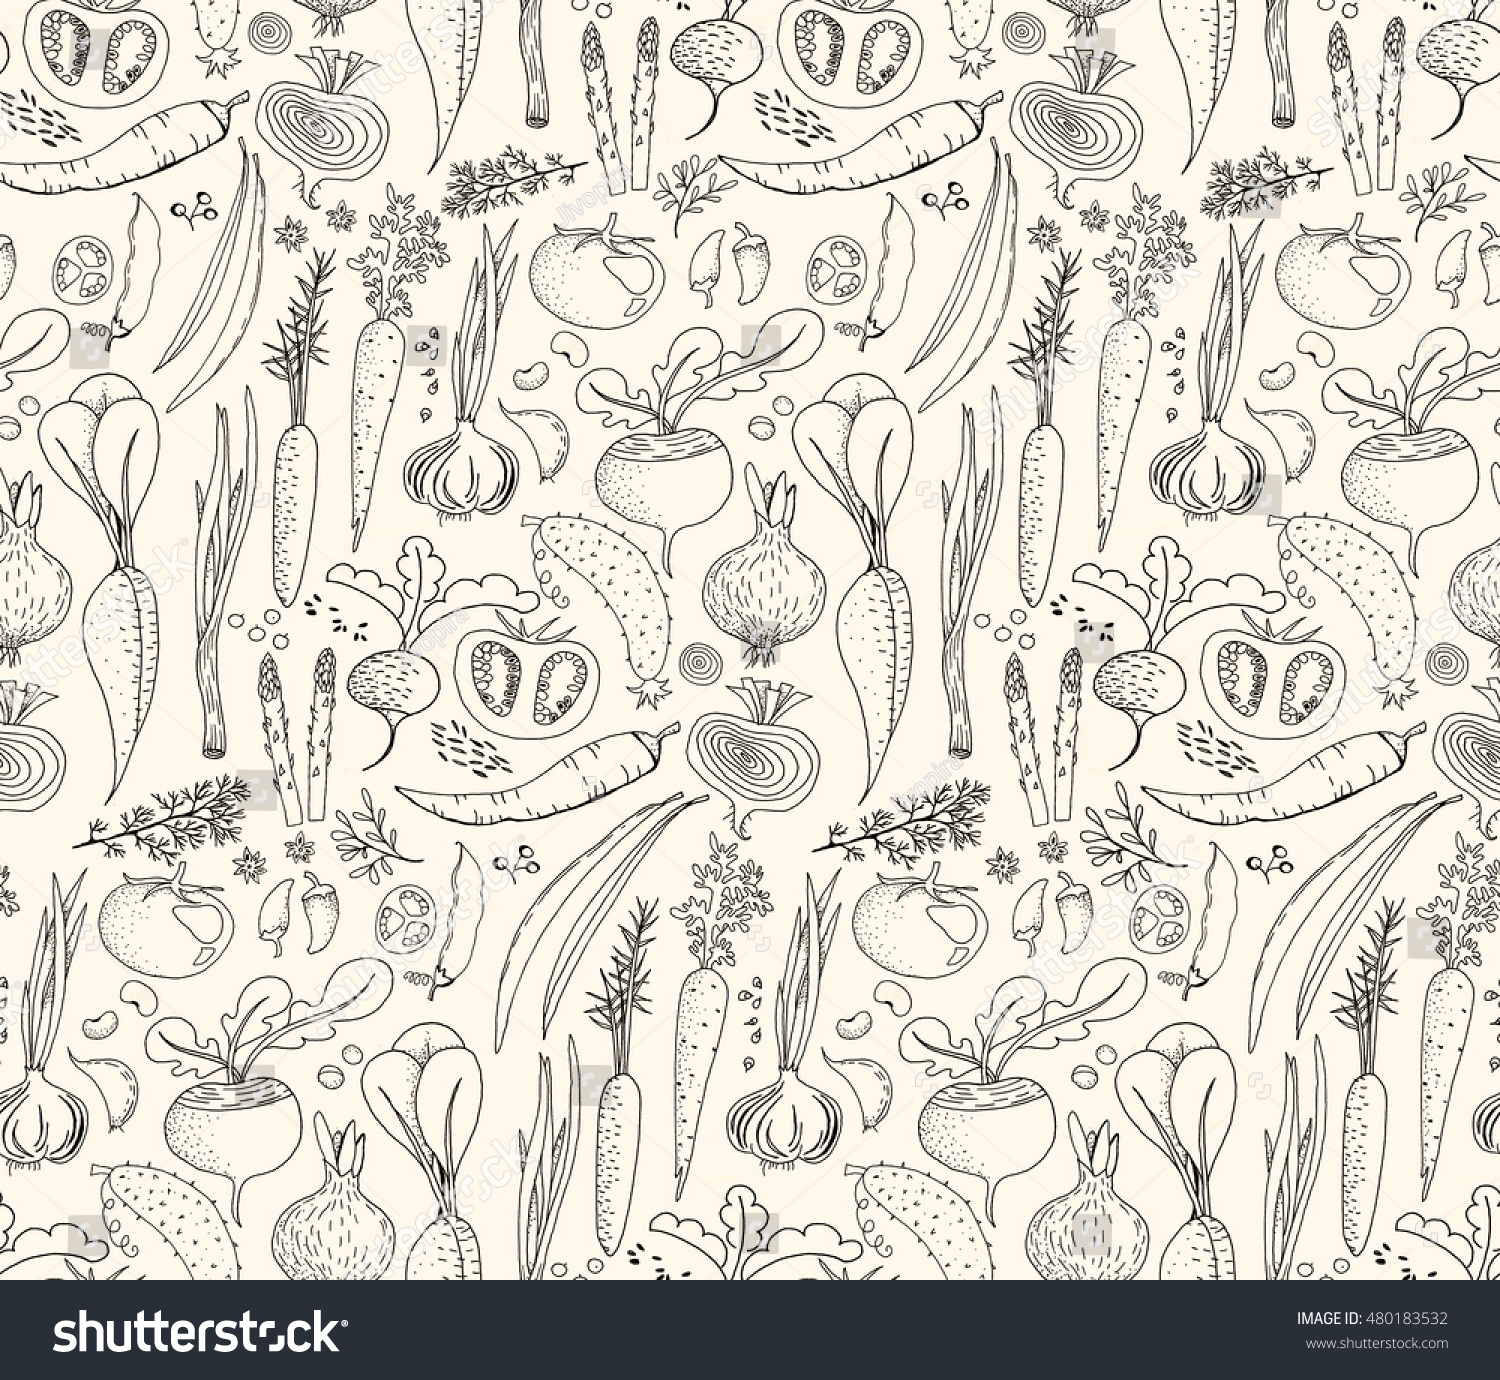 Hand-drawn seamless doodles pattern with different vegetables: tomato, onion, beet, cucumber etc. Harvest repeated background. Line art #480183532